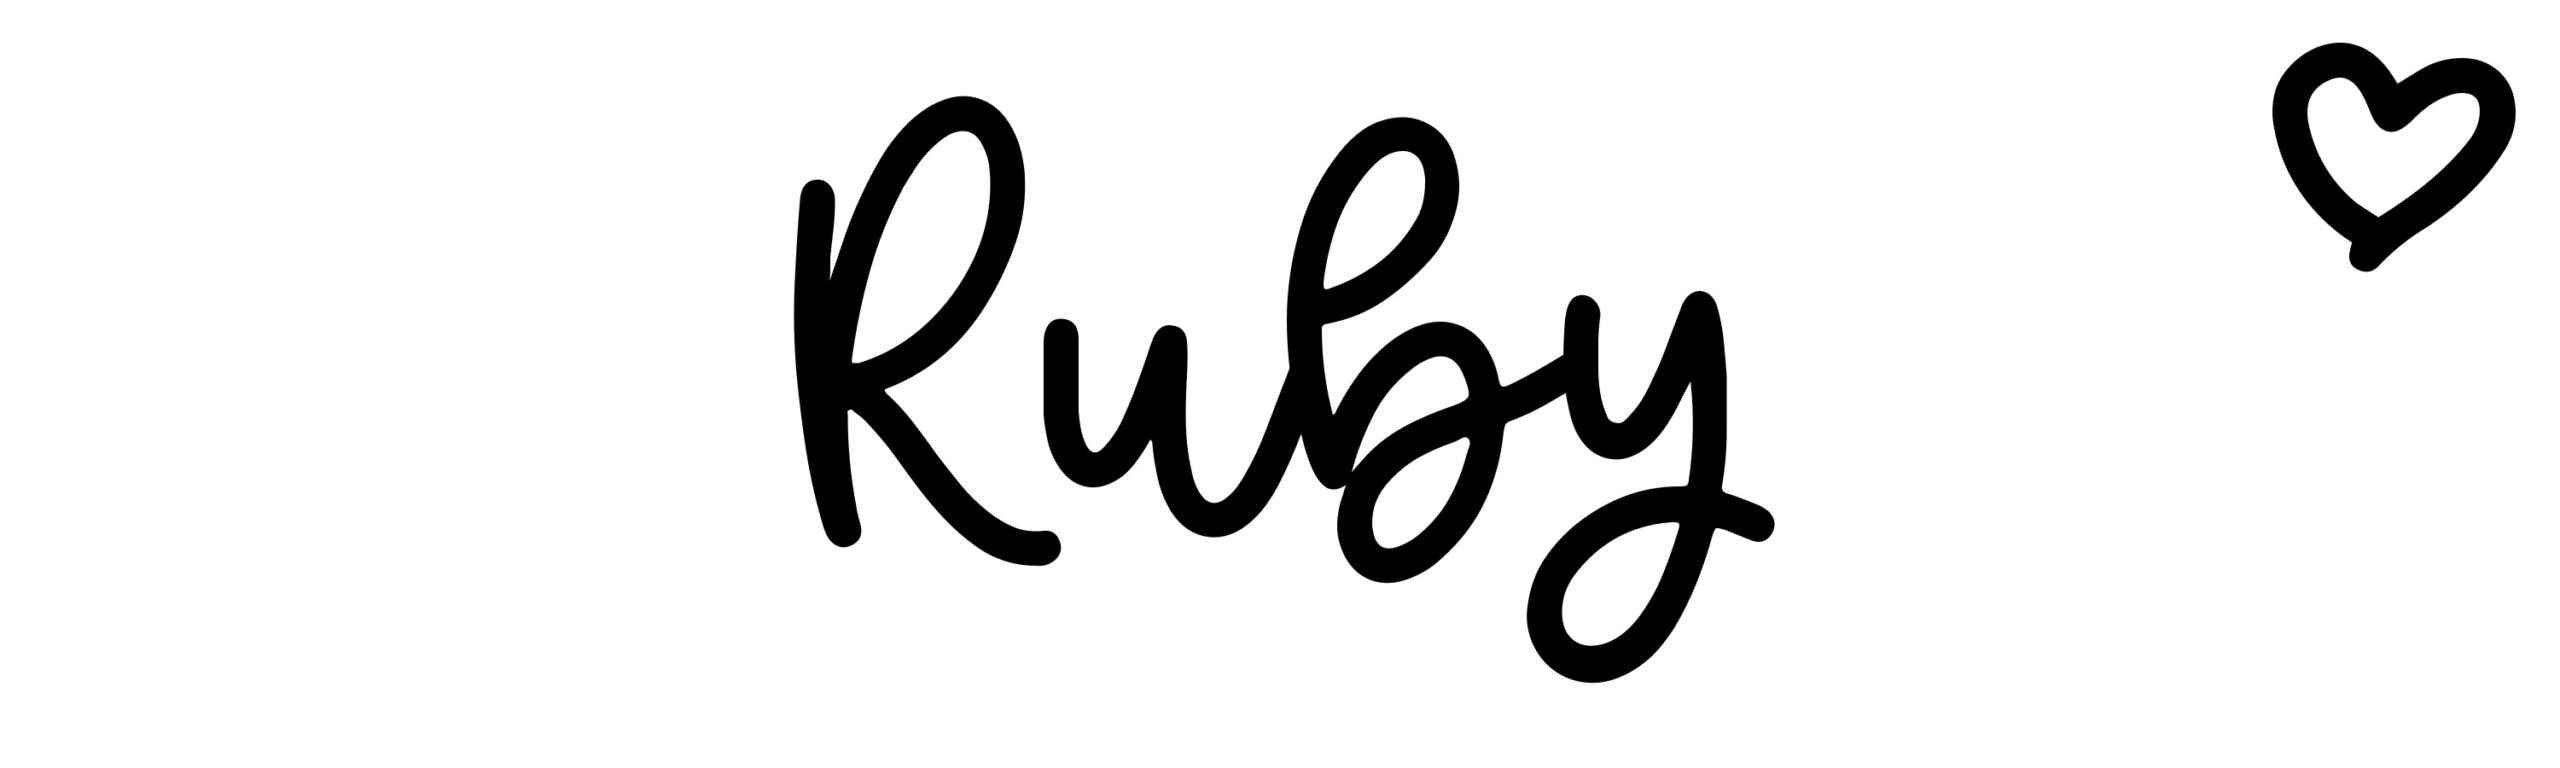 Ruby - Name meaning, origin, variations and more